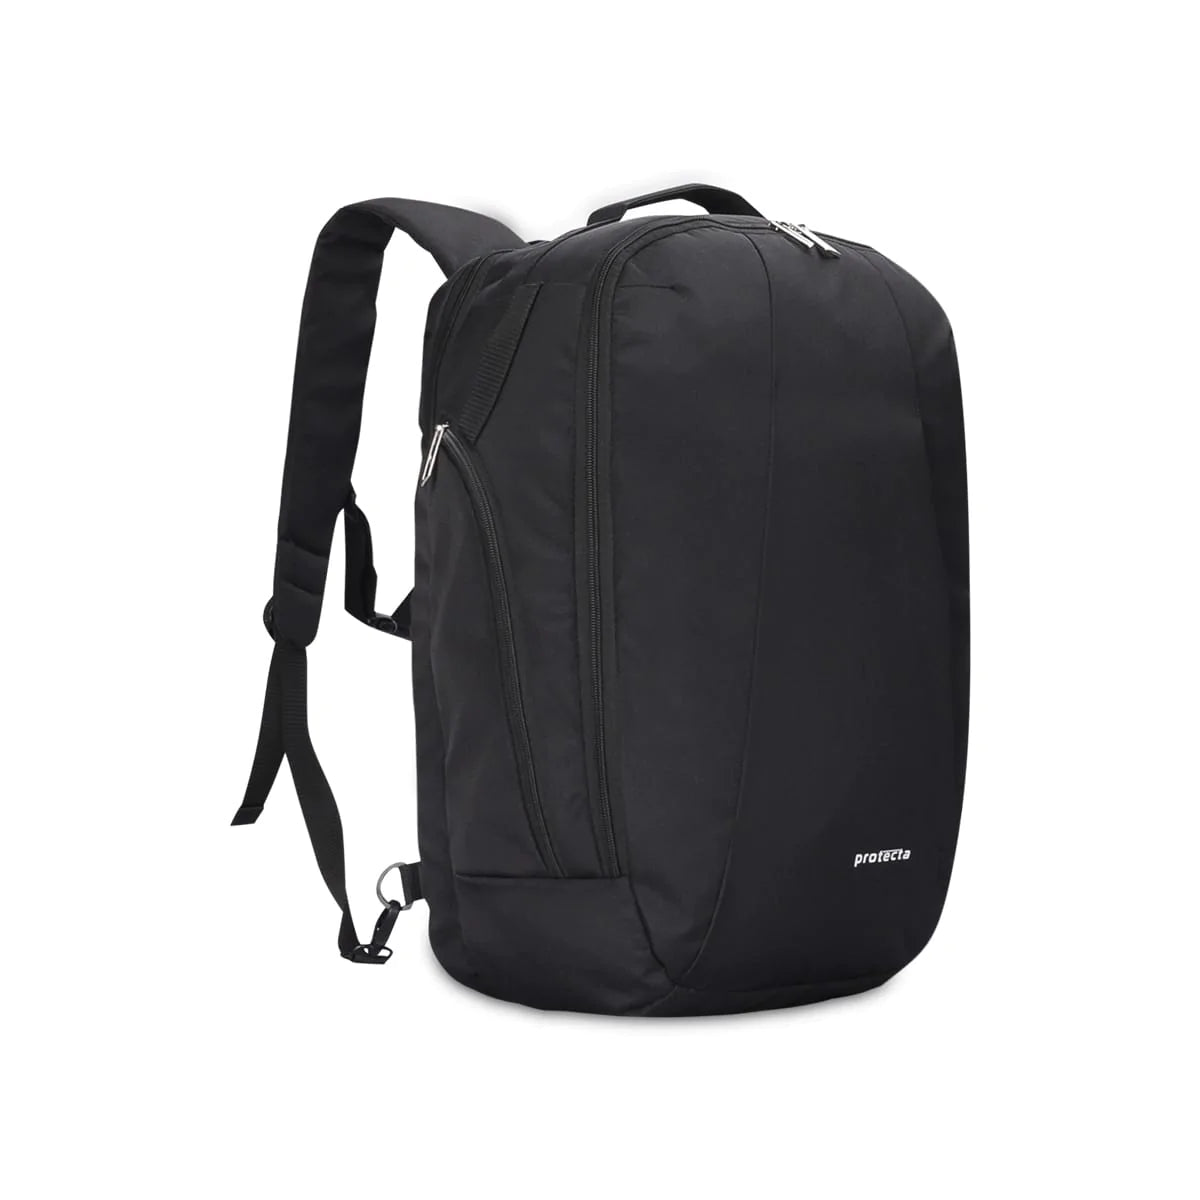 Black | Protecta Proposed Merger Convertible Office Trave Laptop Backpack-1